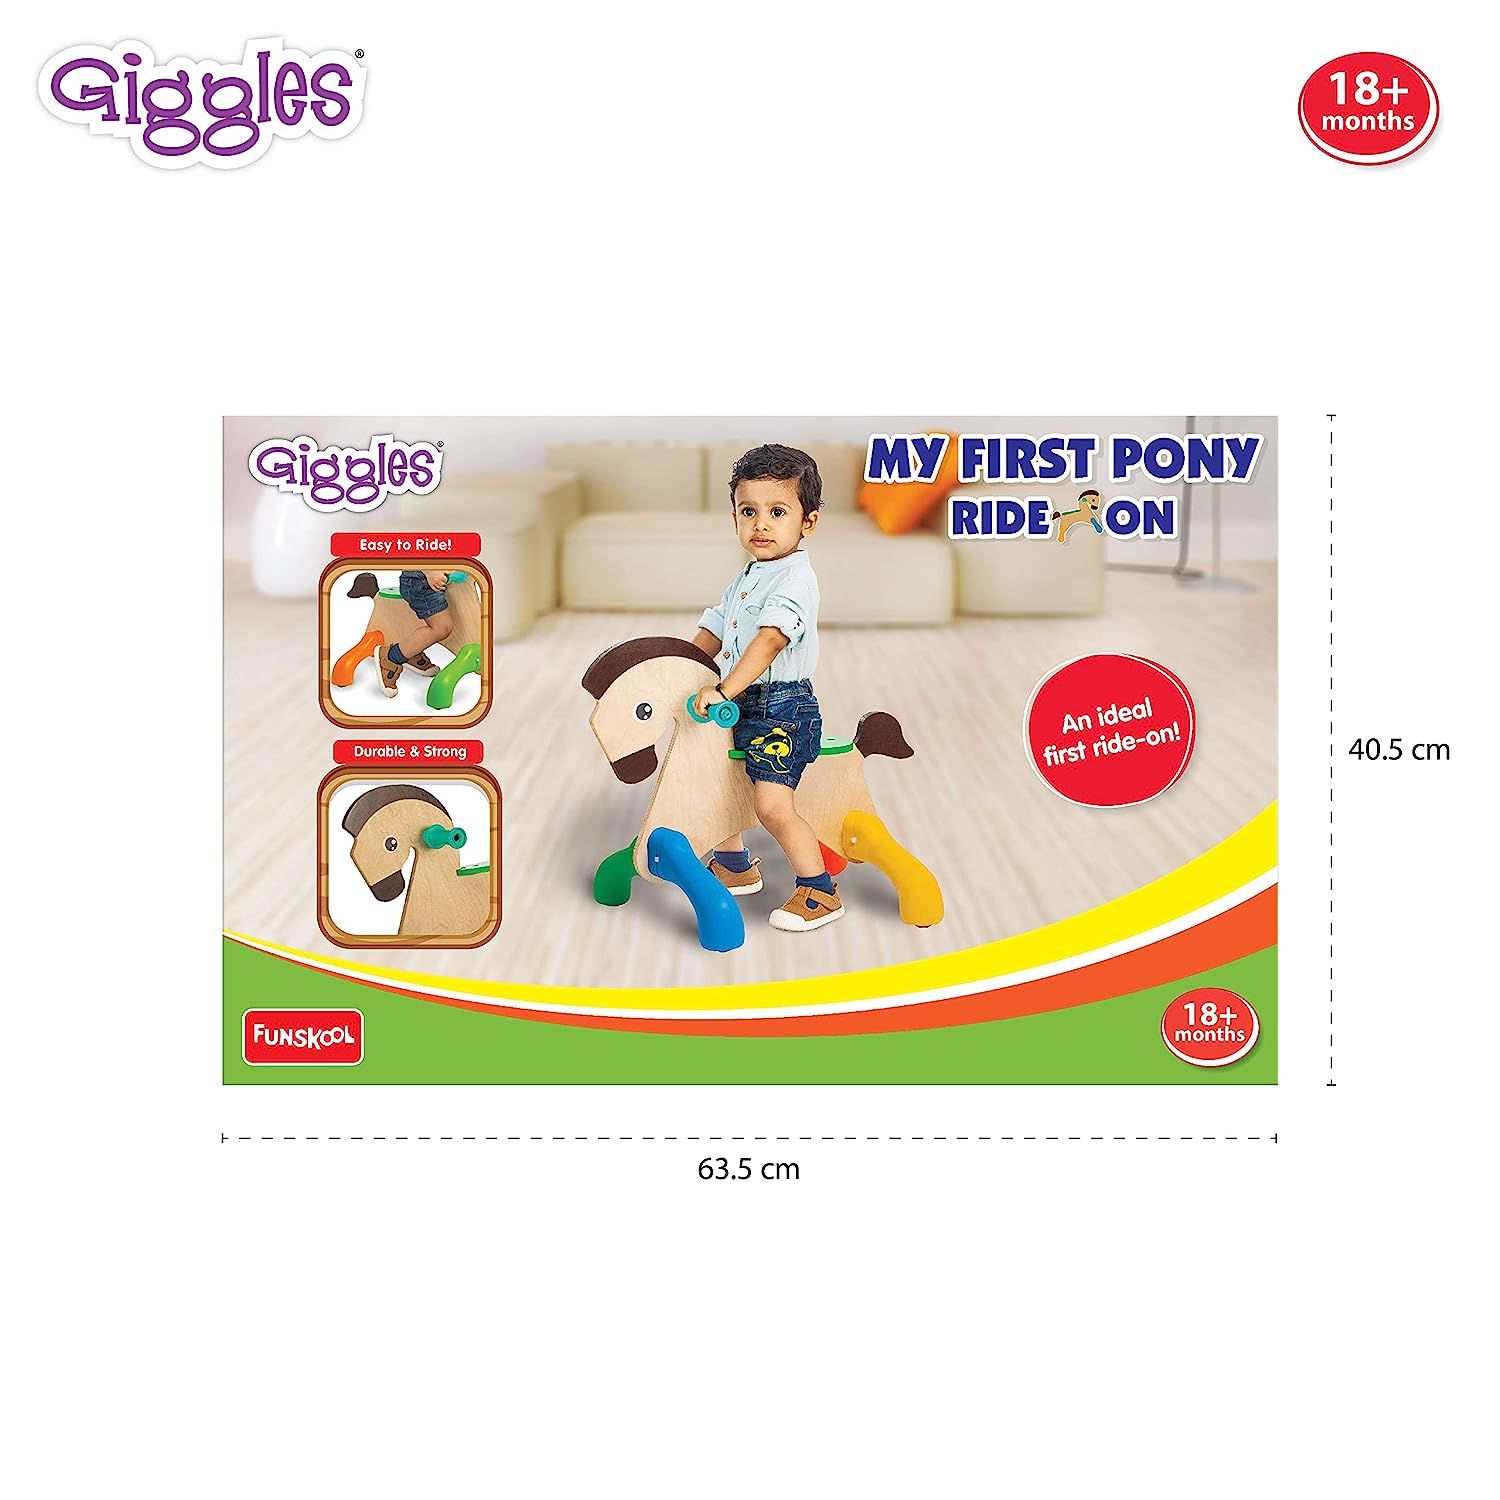 Funskool Giggles My First Pony Ride On Toy for Kids Ages 2+